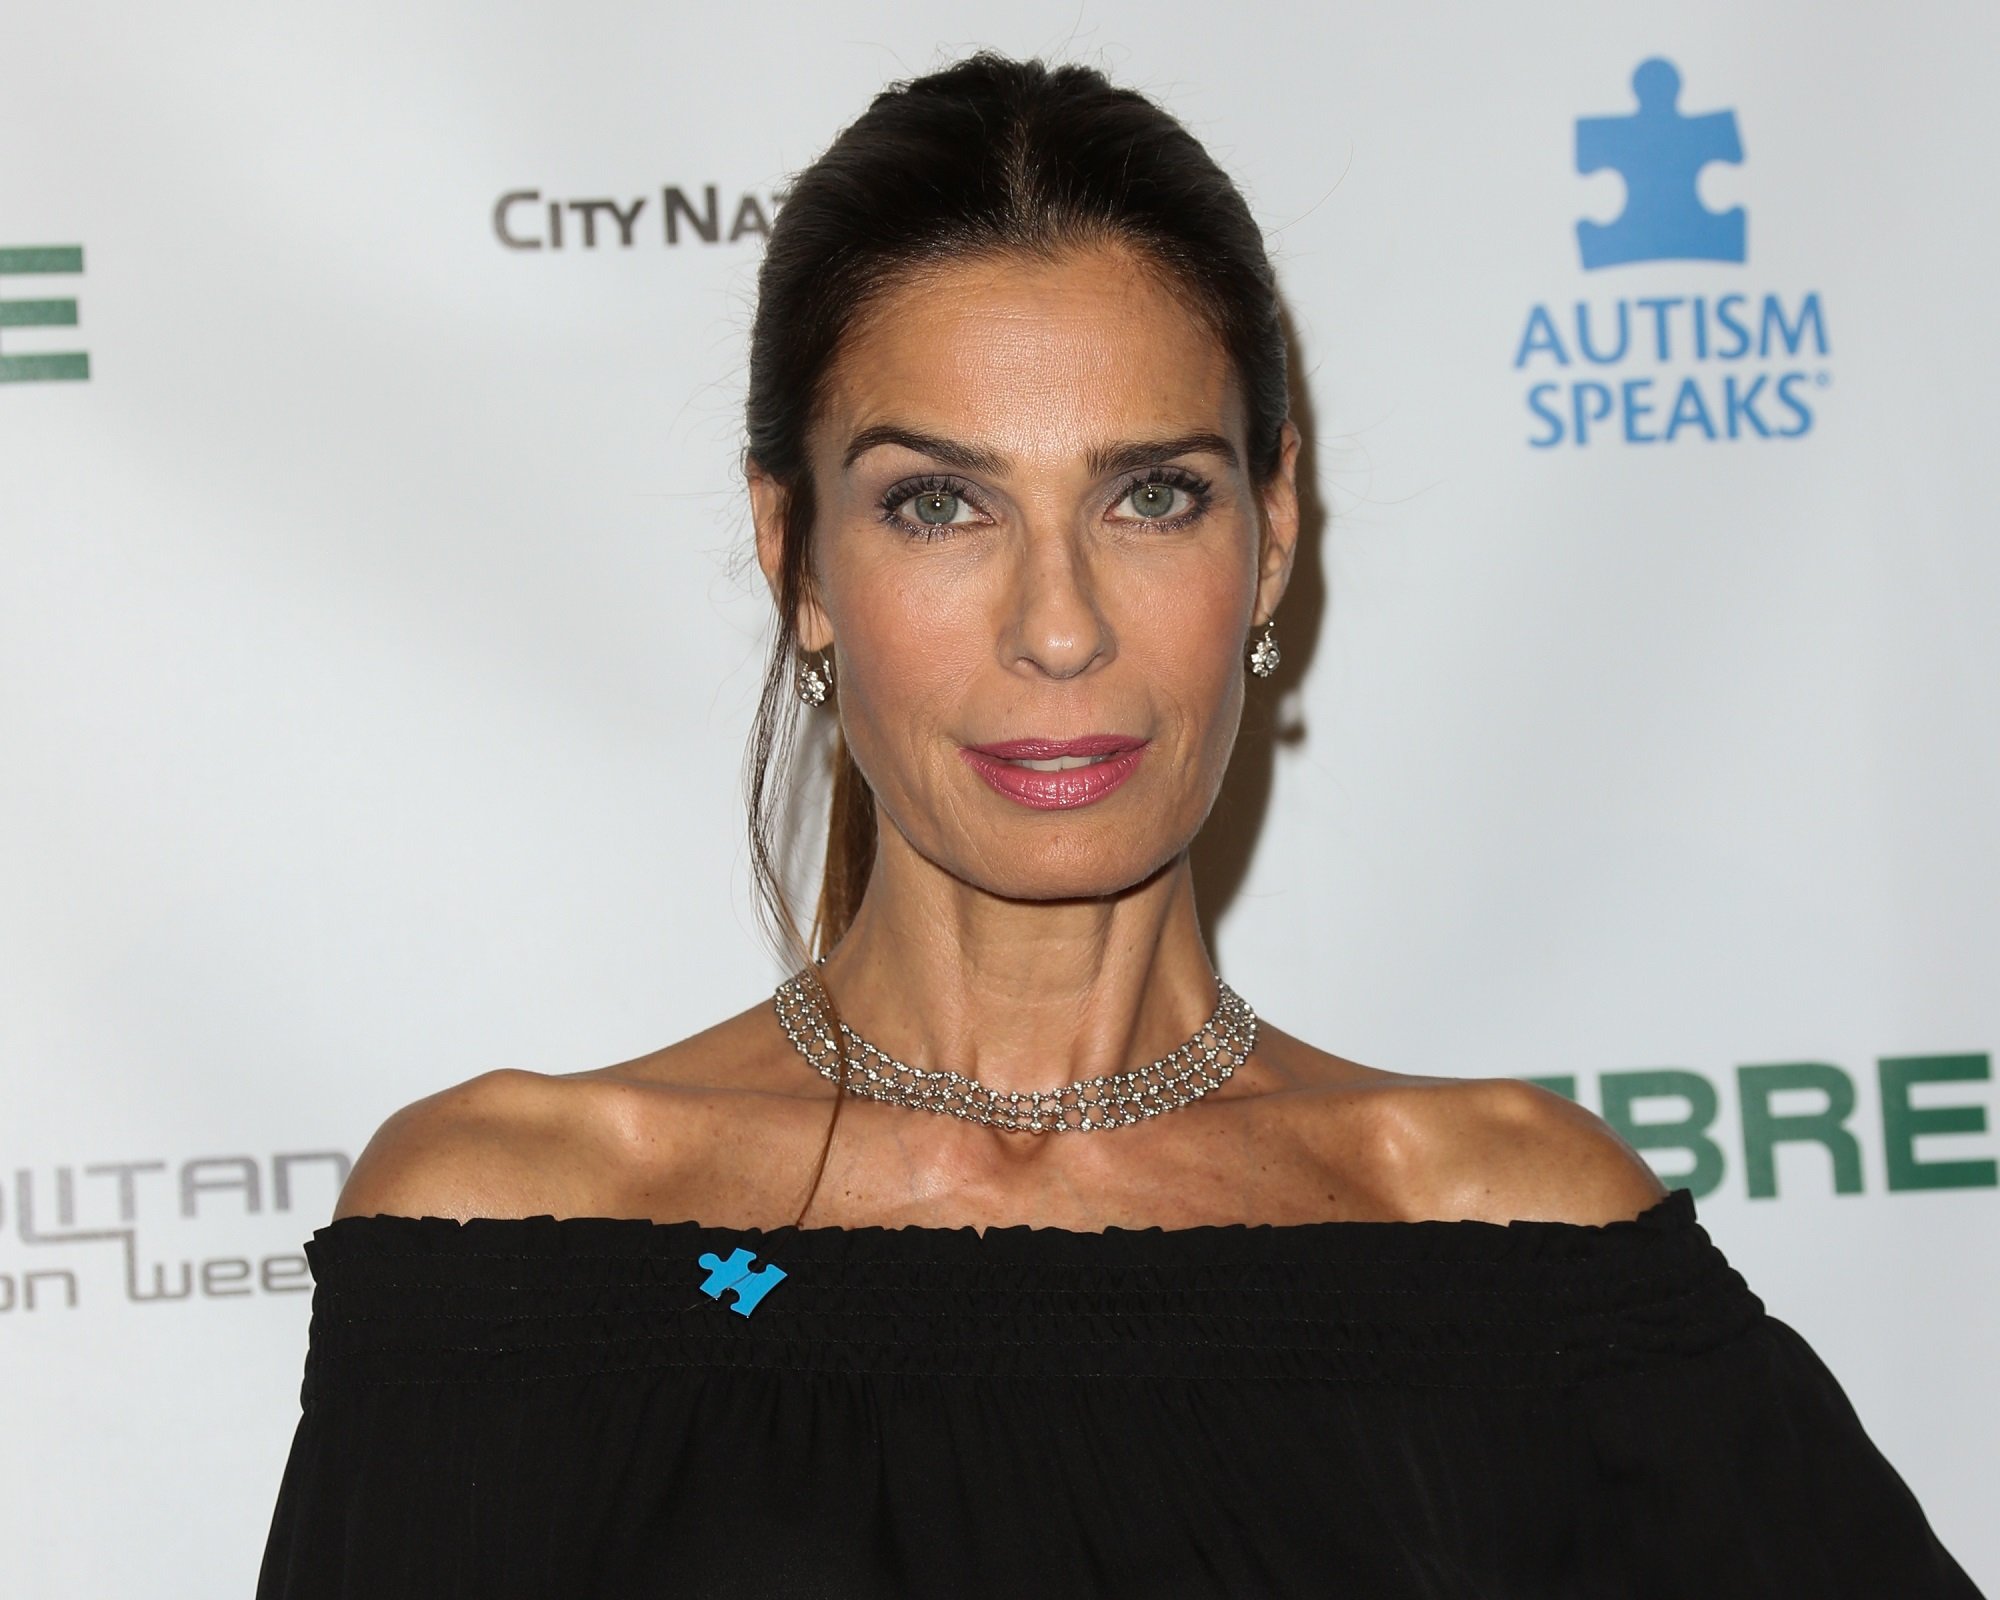 Kristian Alfonso played Hope on Days of Our Lives - pictured here on the red carpet